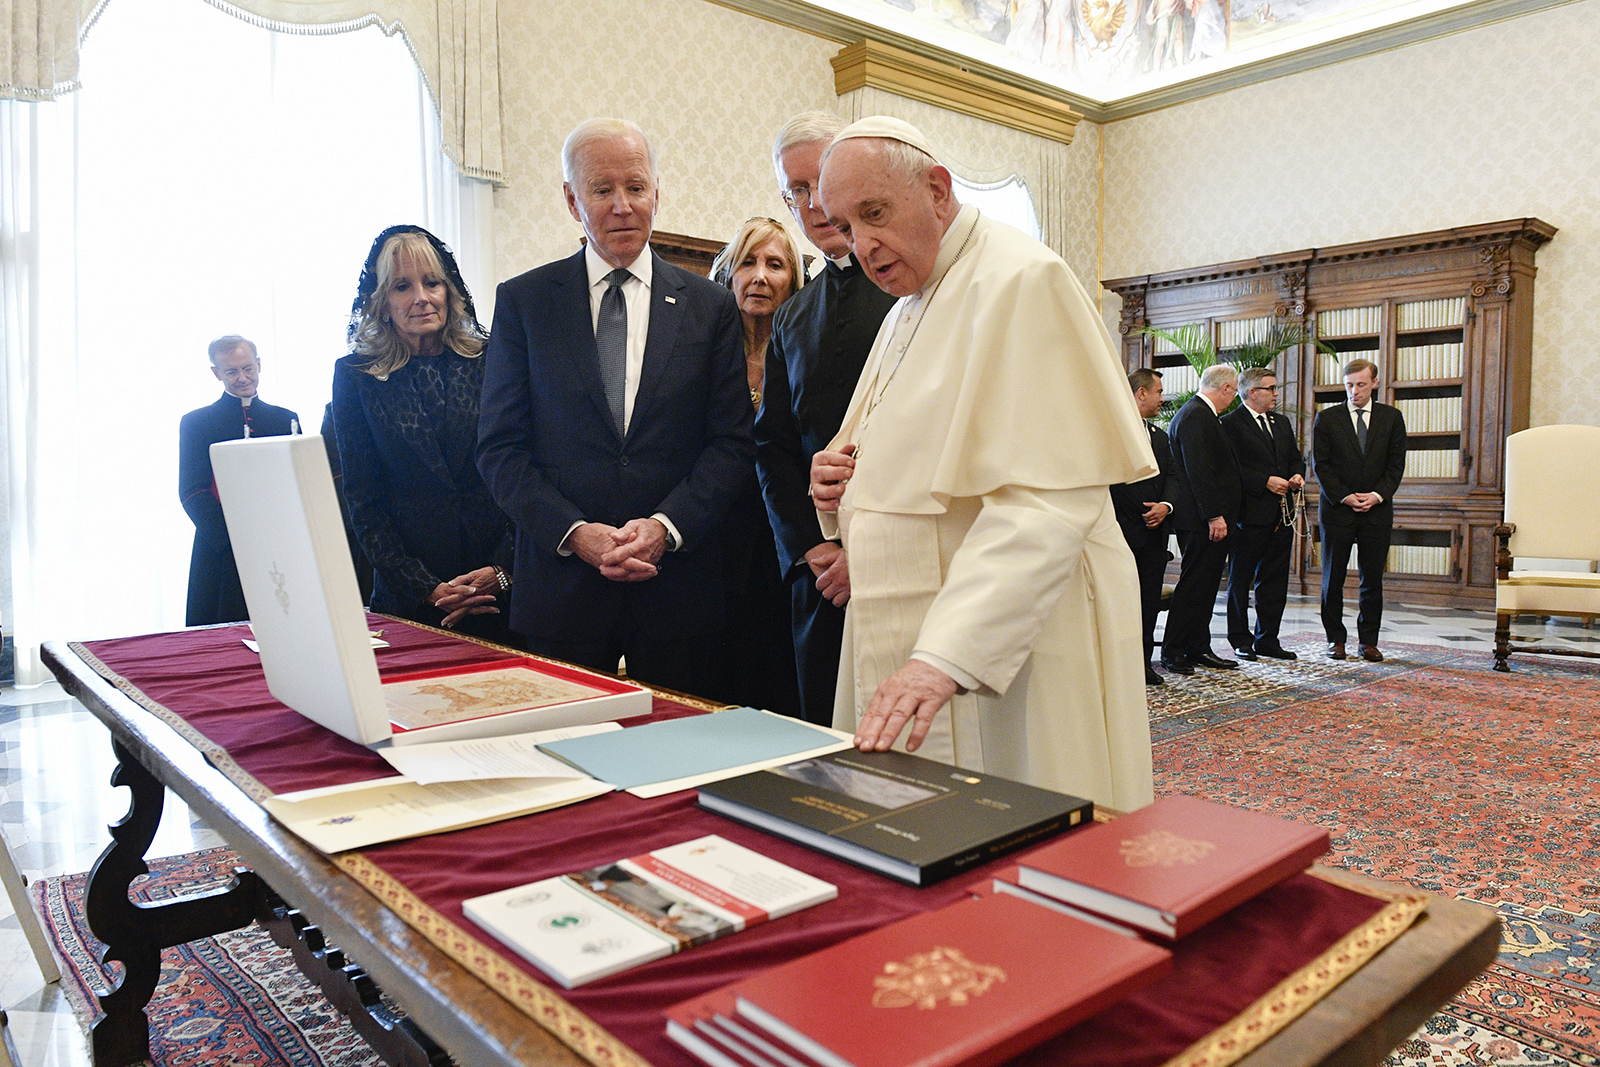 President Joe Biden and first lady Jill Biden exchange gifts with Pope Francis as they meet at the Vatican, Friday, Oct. 29, 2021. Photo by Vatican Media